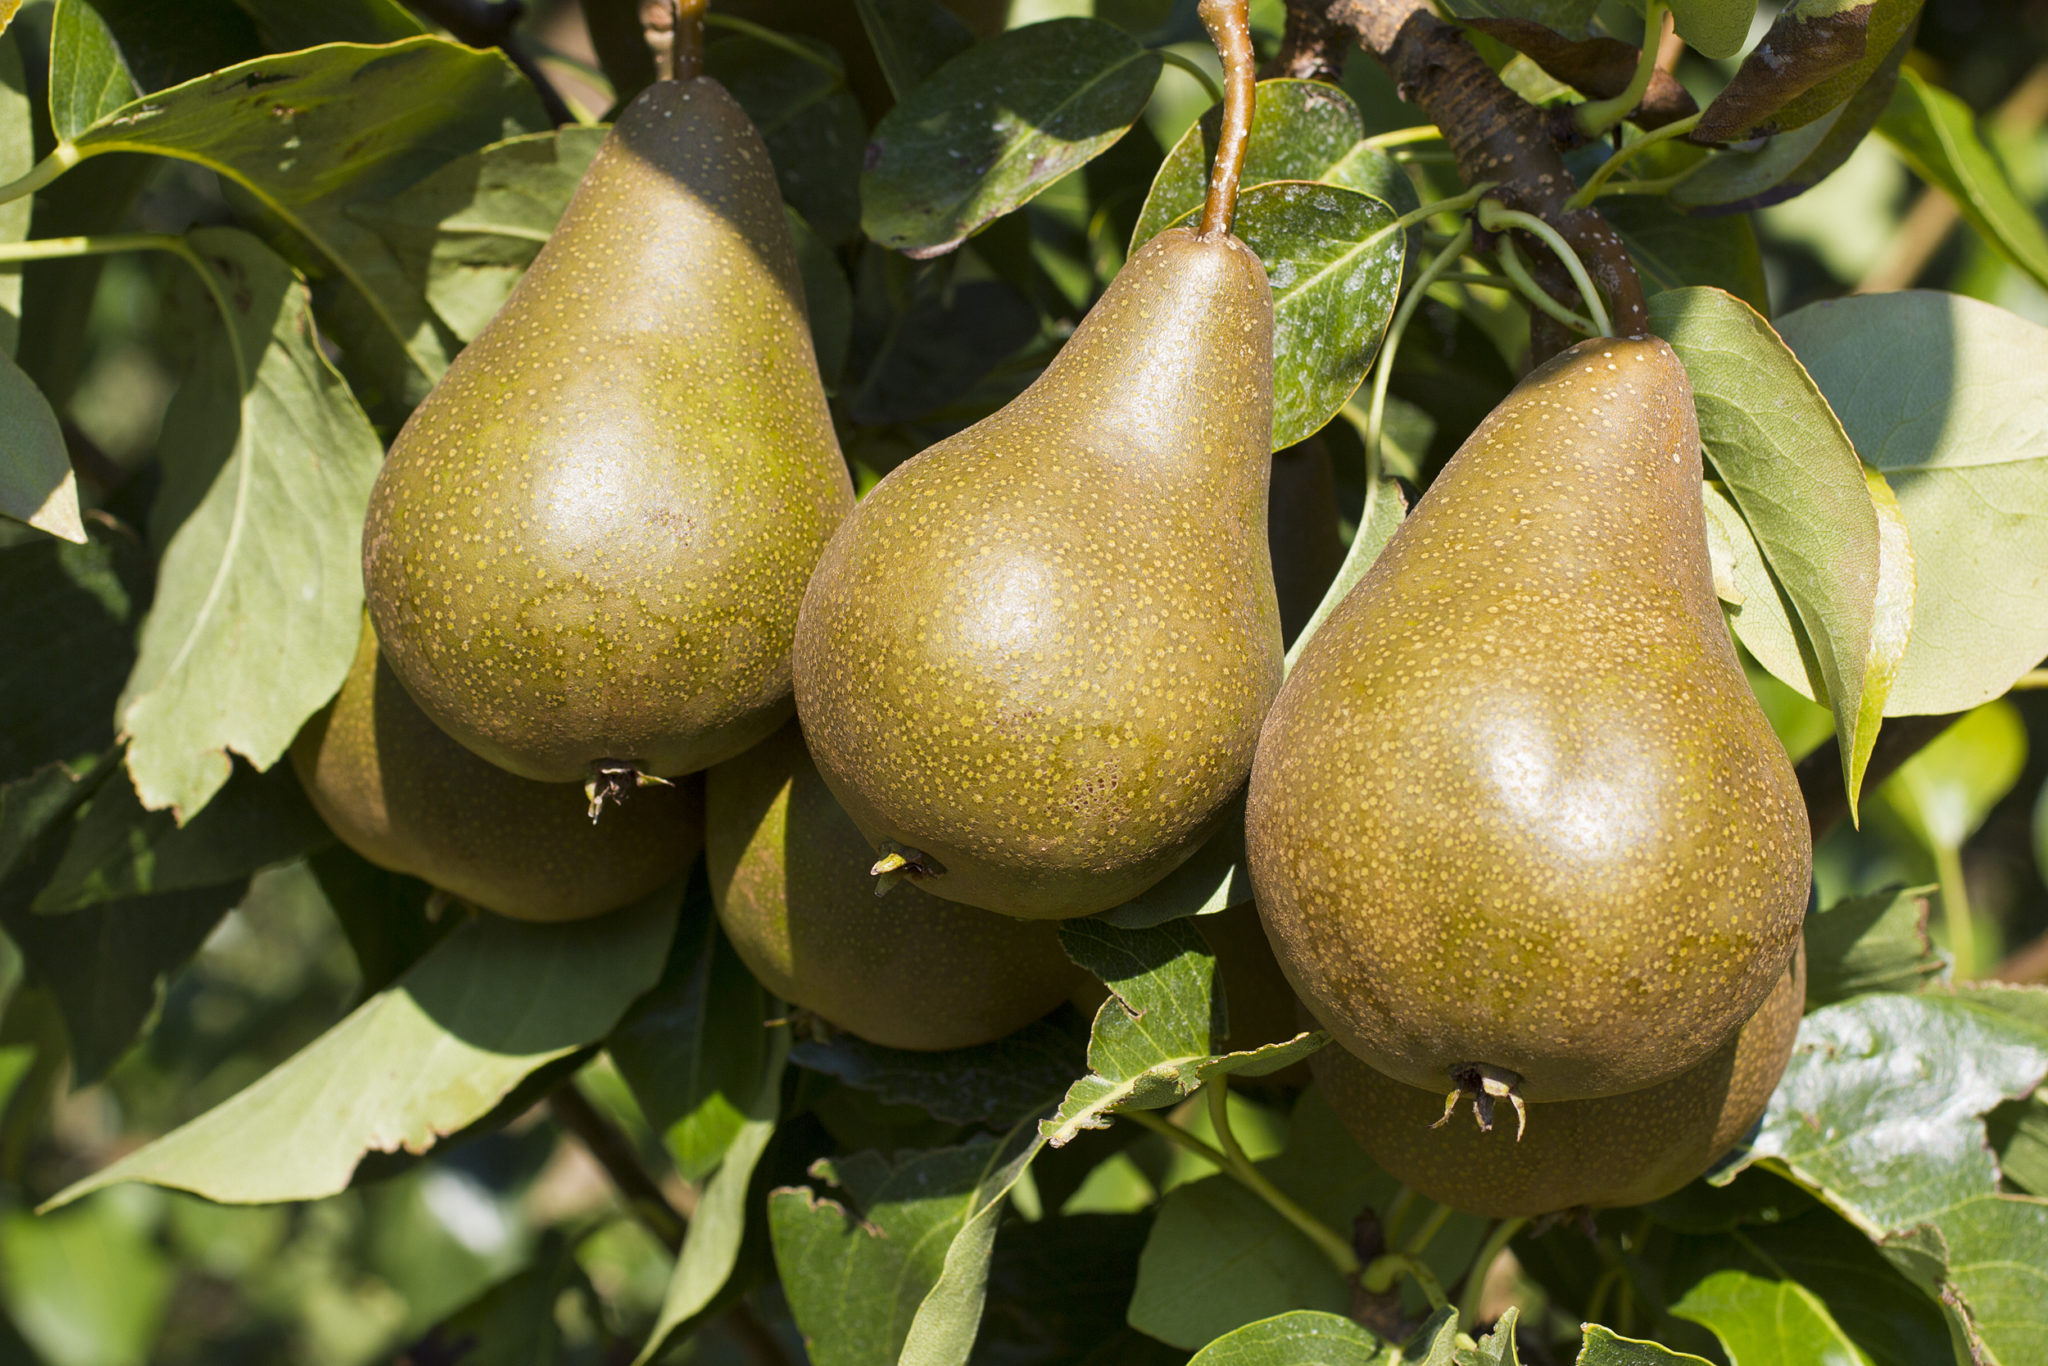 https://bishopsorchards.com/wp-content/uploads/2019/09/bigstock-Bosc-Pears-in-an-Orchard-23670644-1.jpg